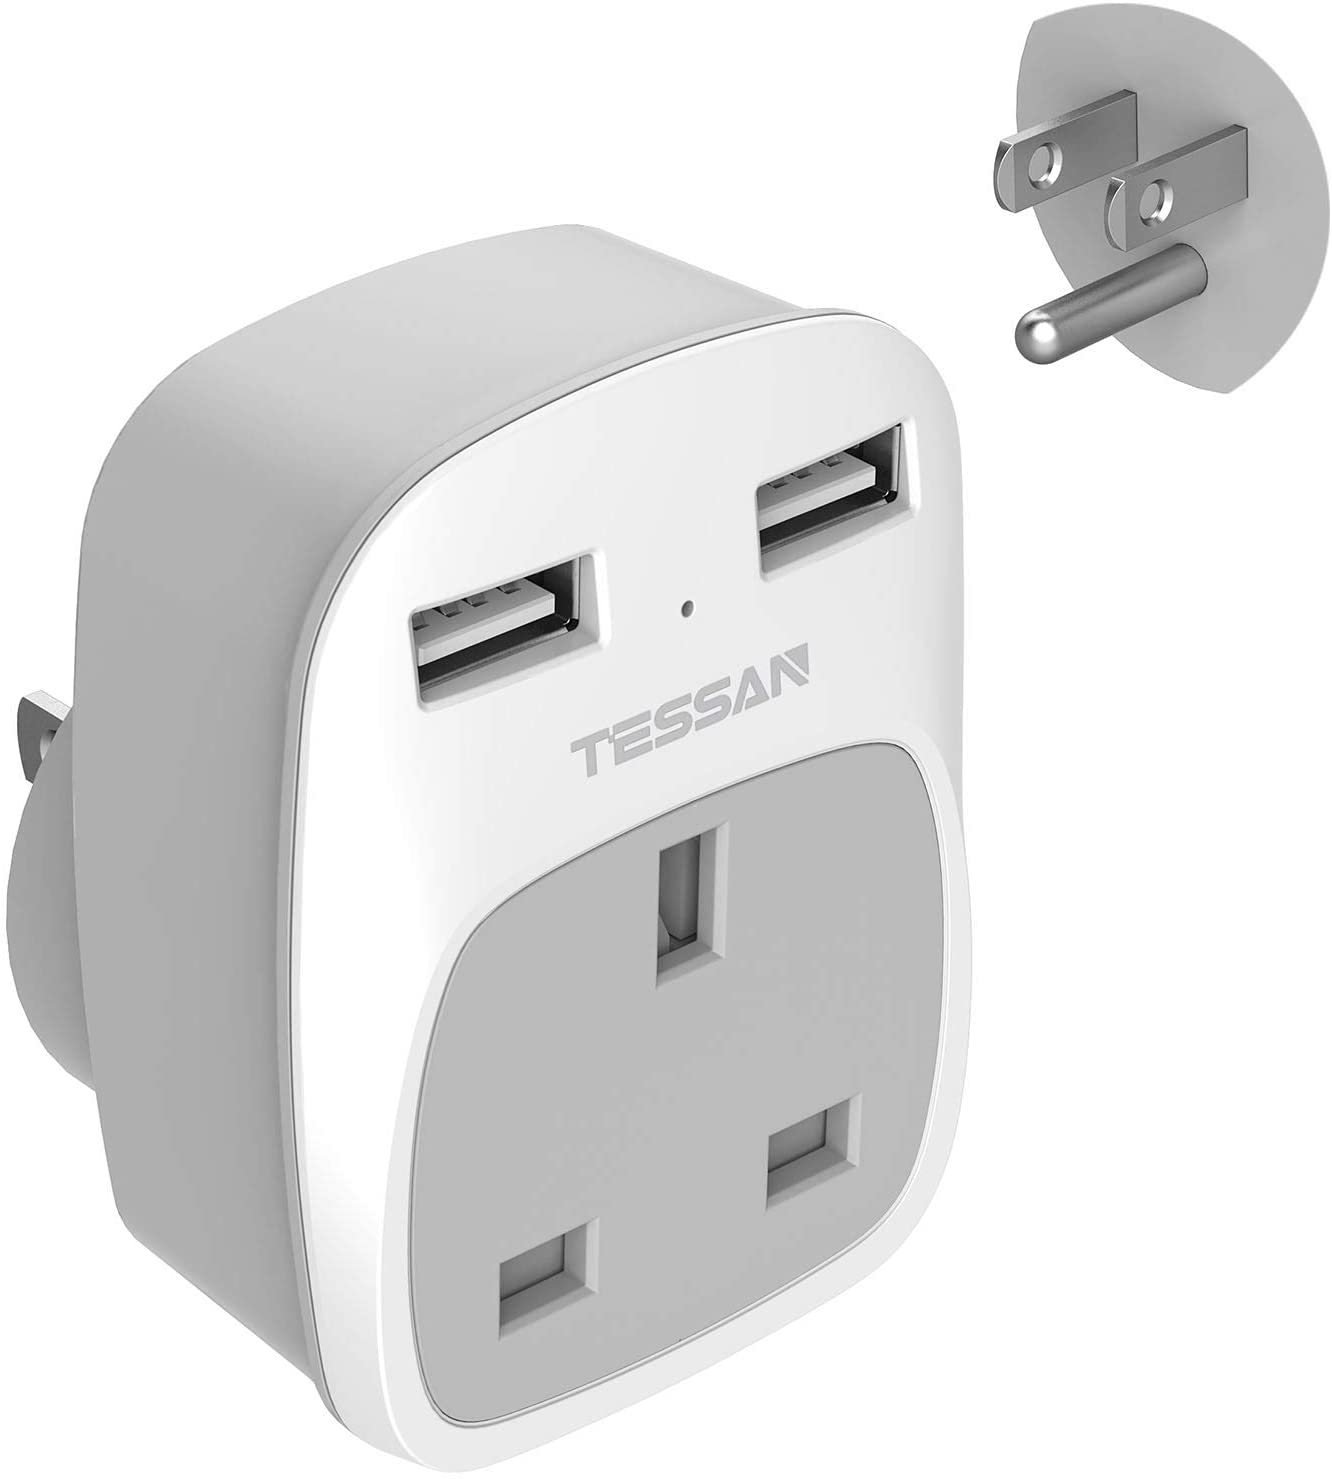 travel adaptor needed for thailand